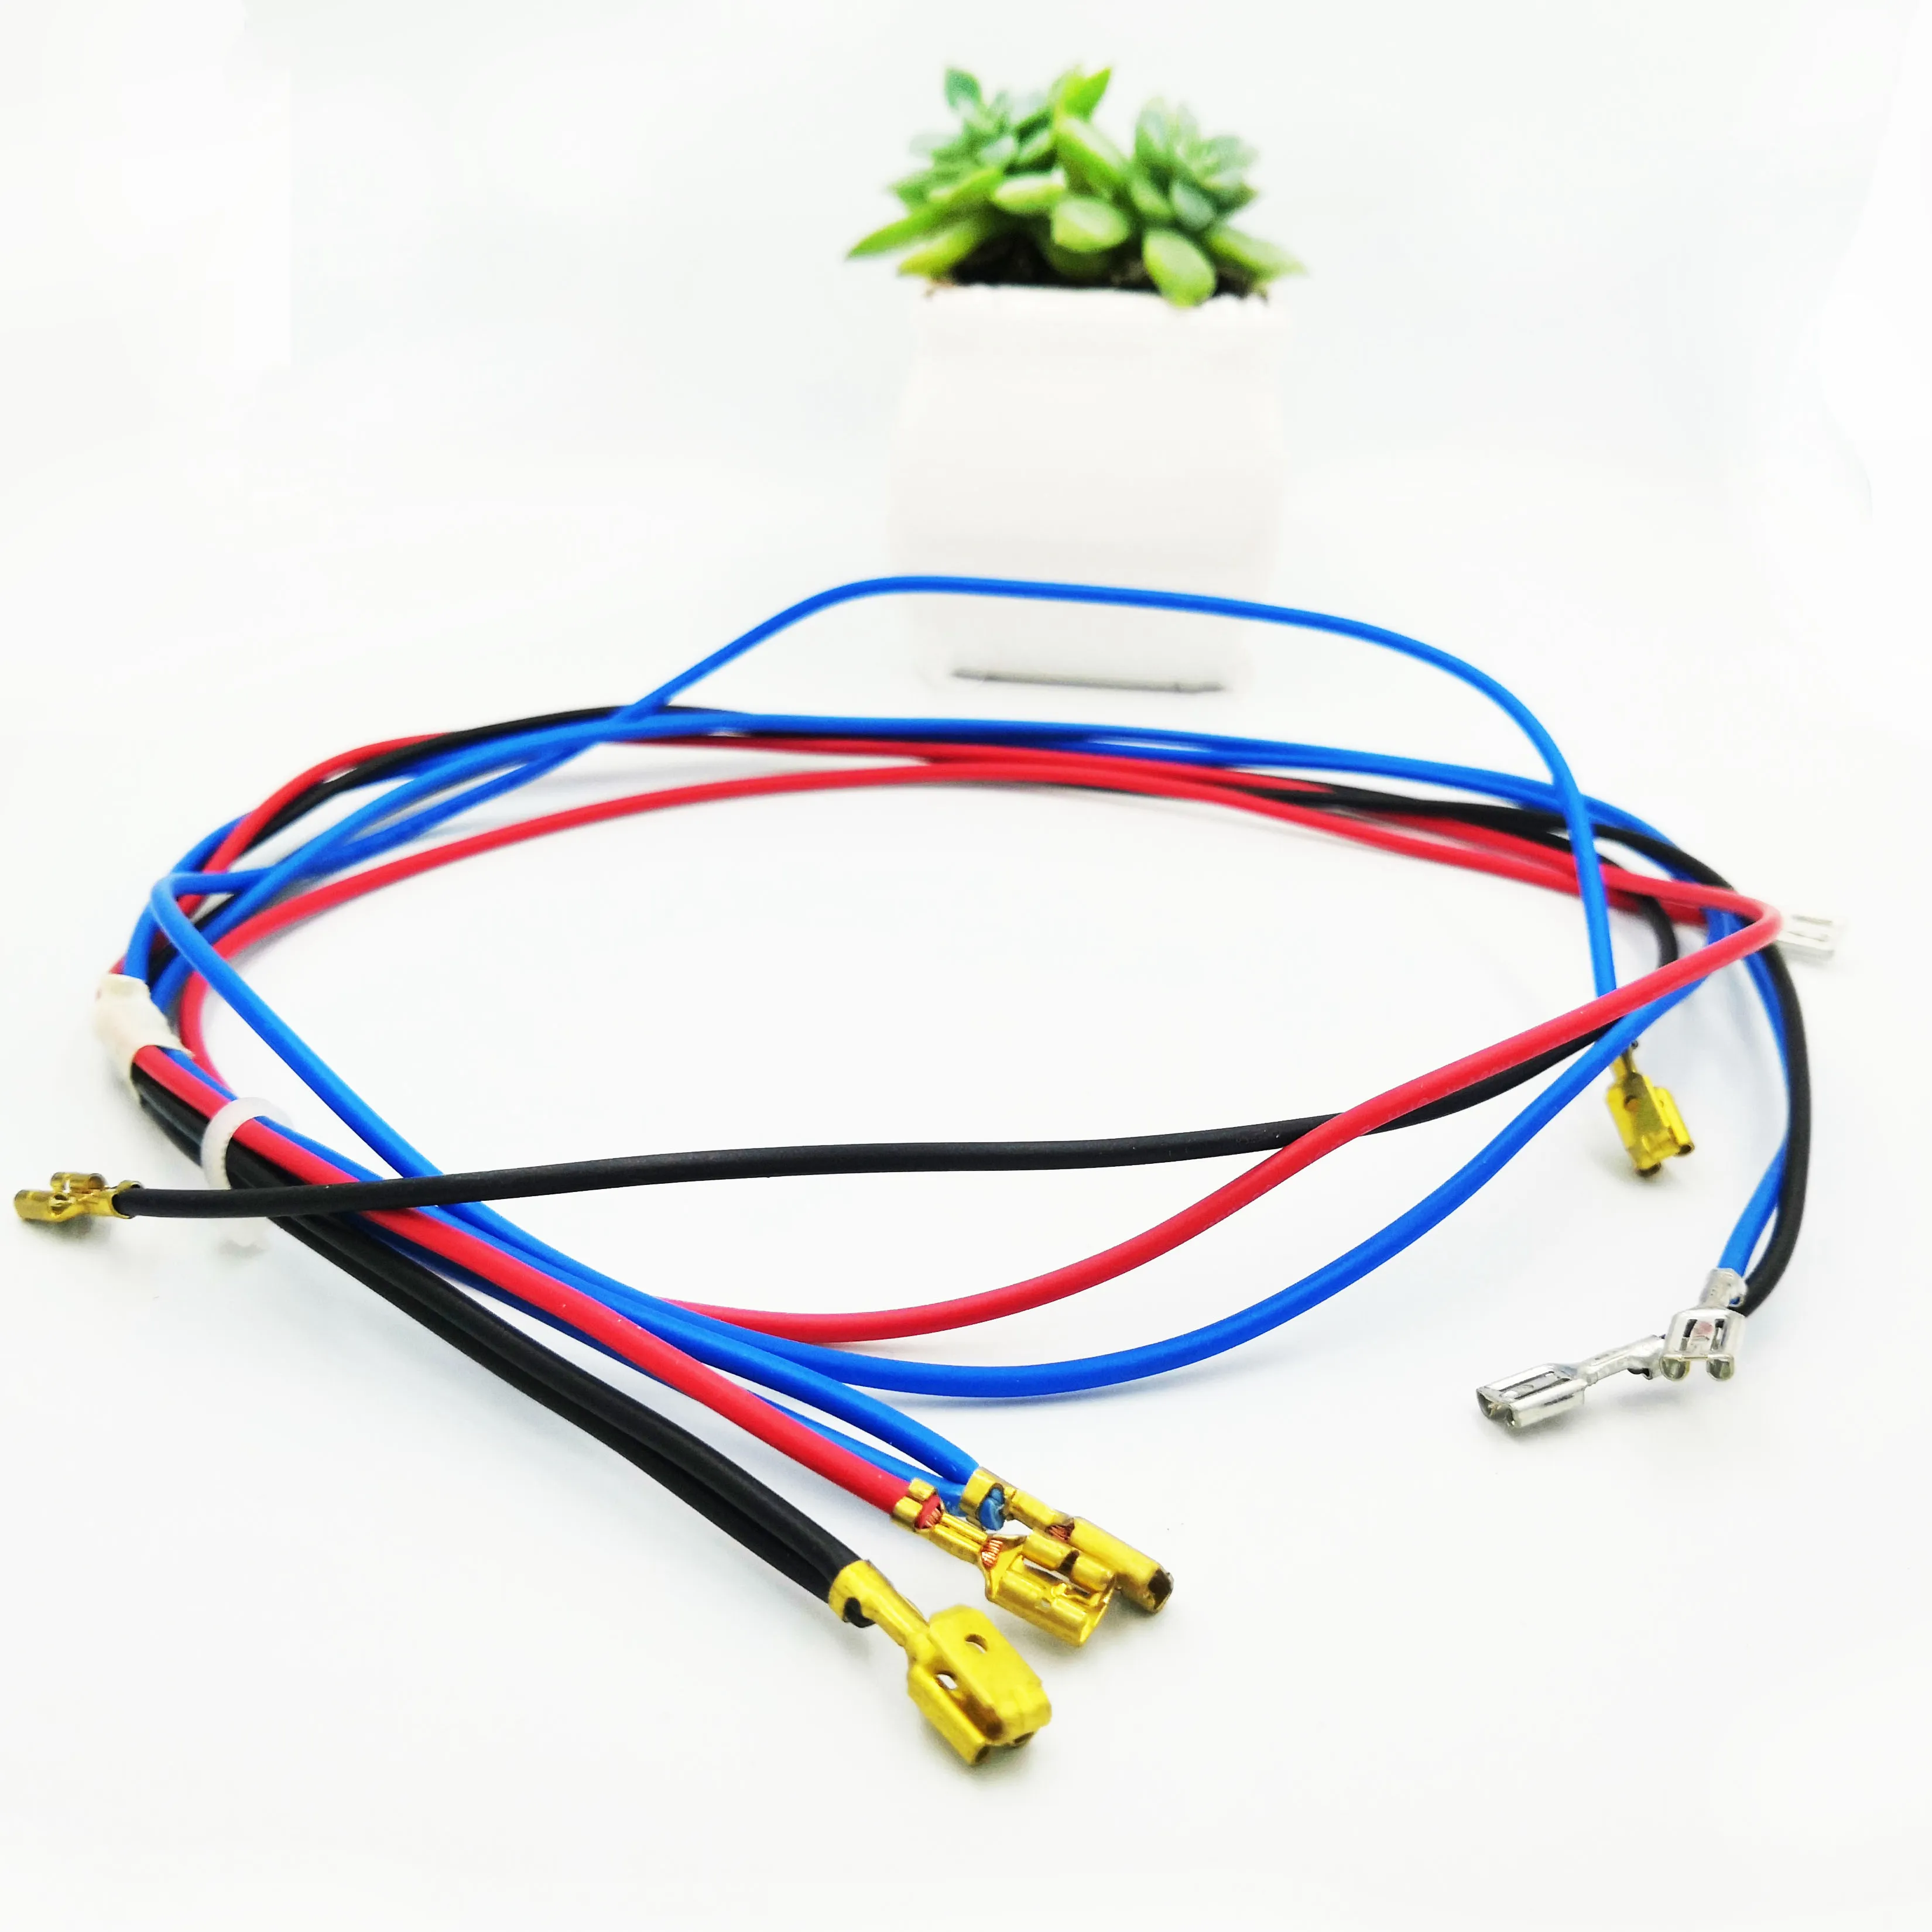 UL VDE CSA certificate wire harness assembly 6 pin connector wire harness